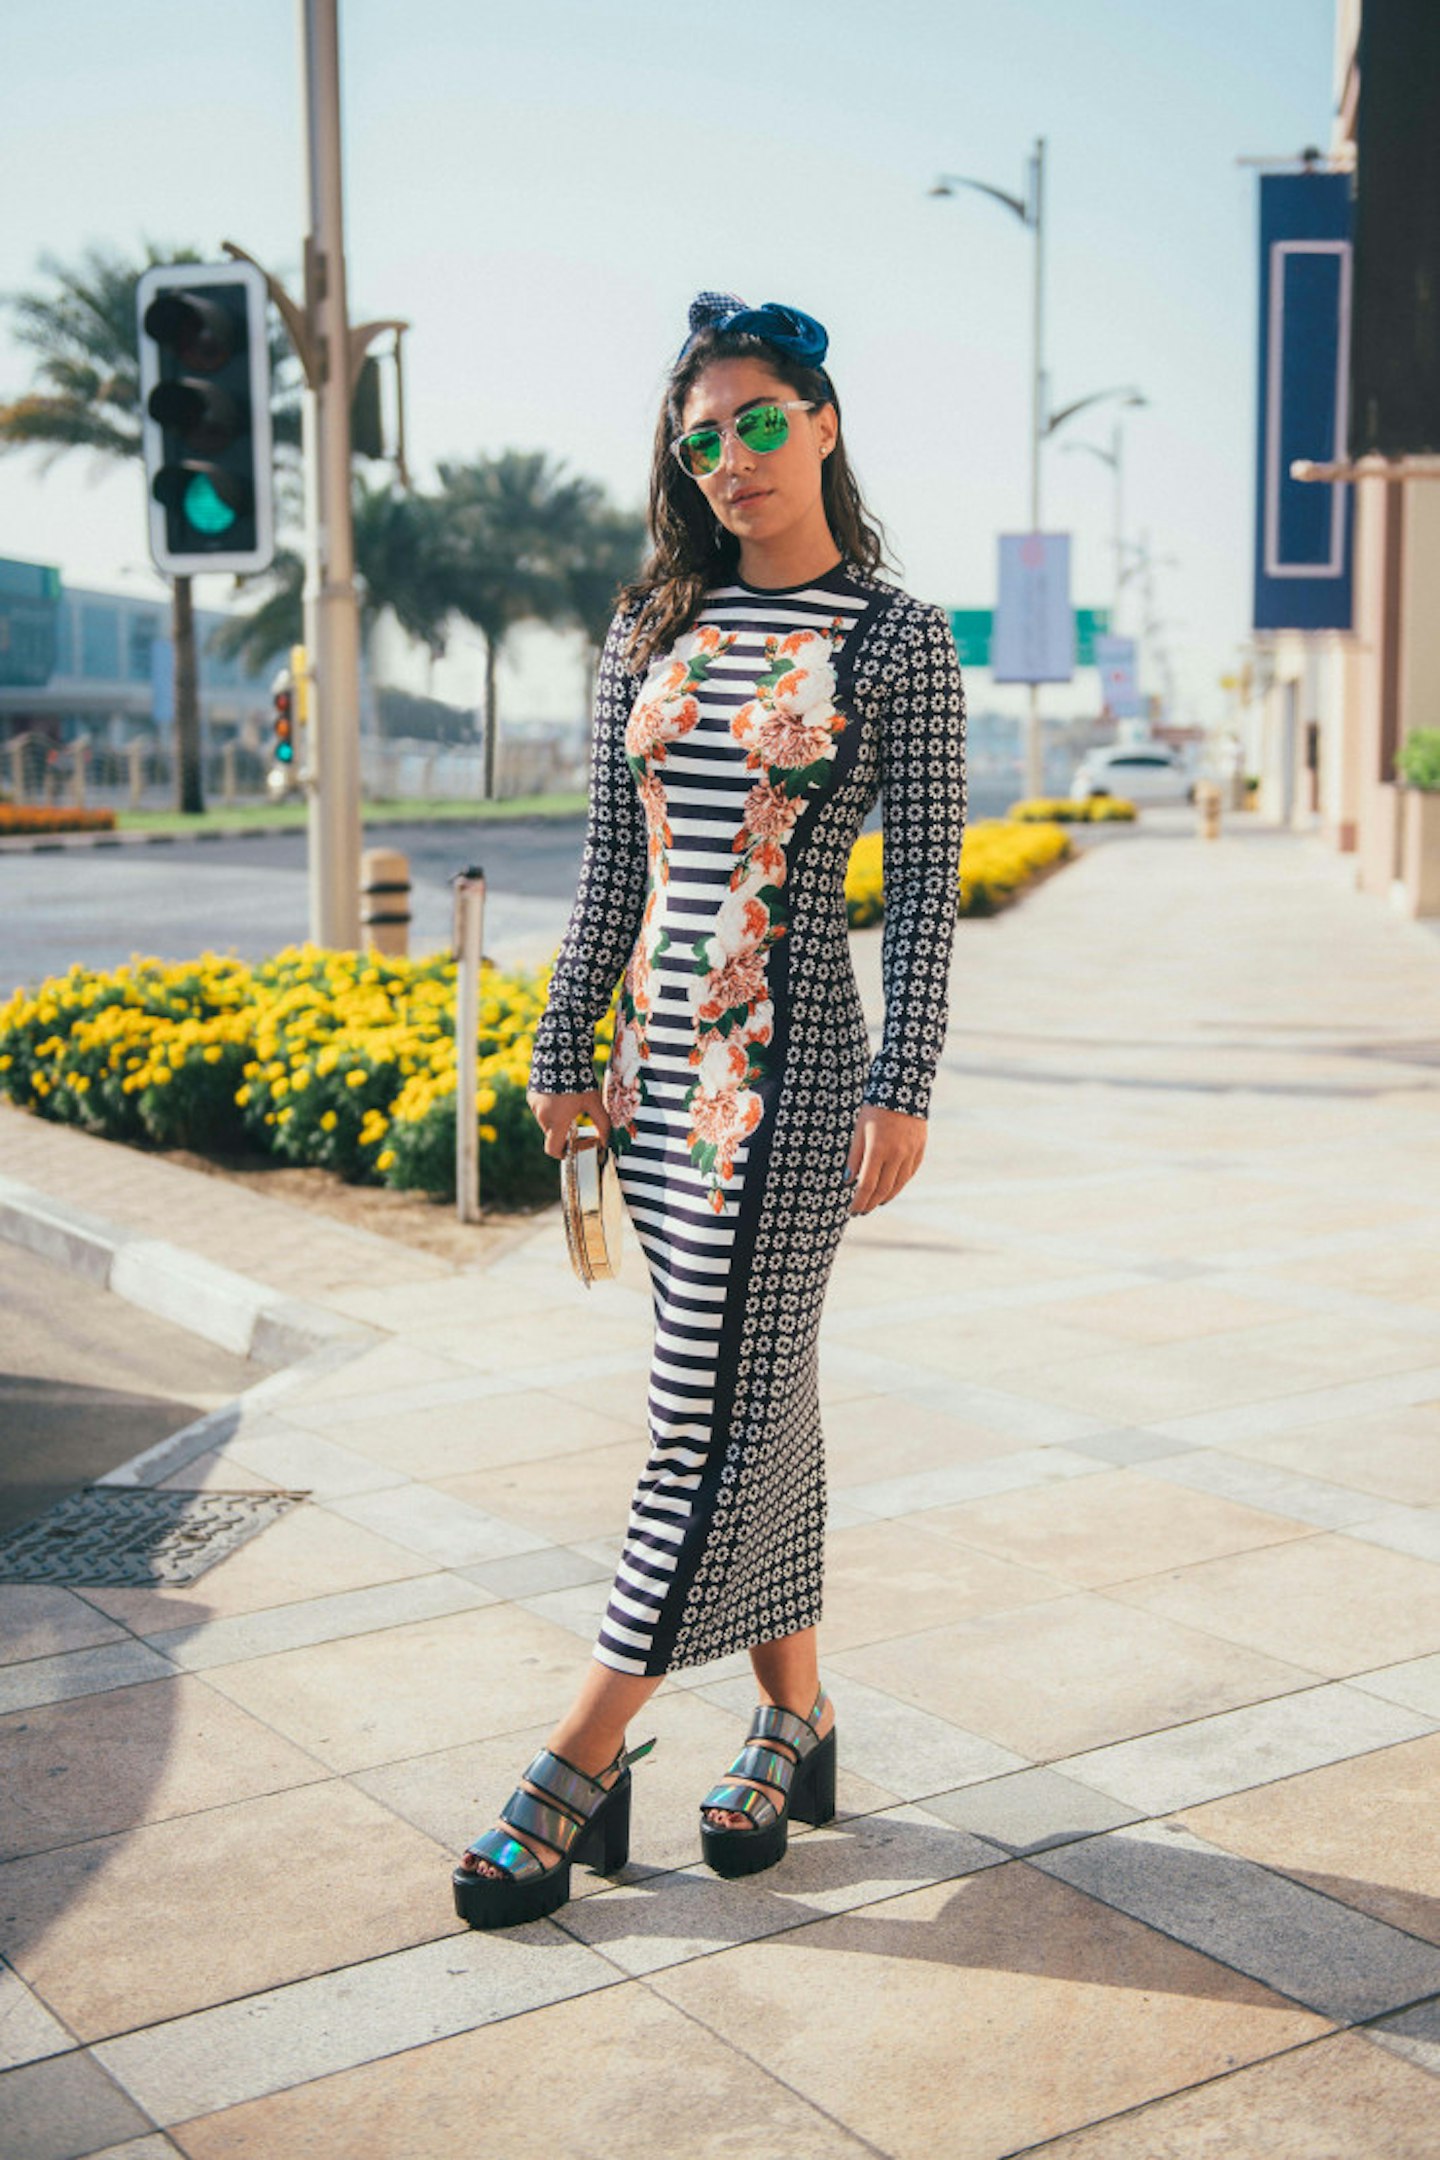 Our Alya Mooro rocking dress from Mother of Pearl on a shoot with S*uce Boutique in Dubai